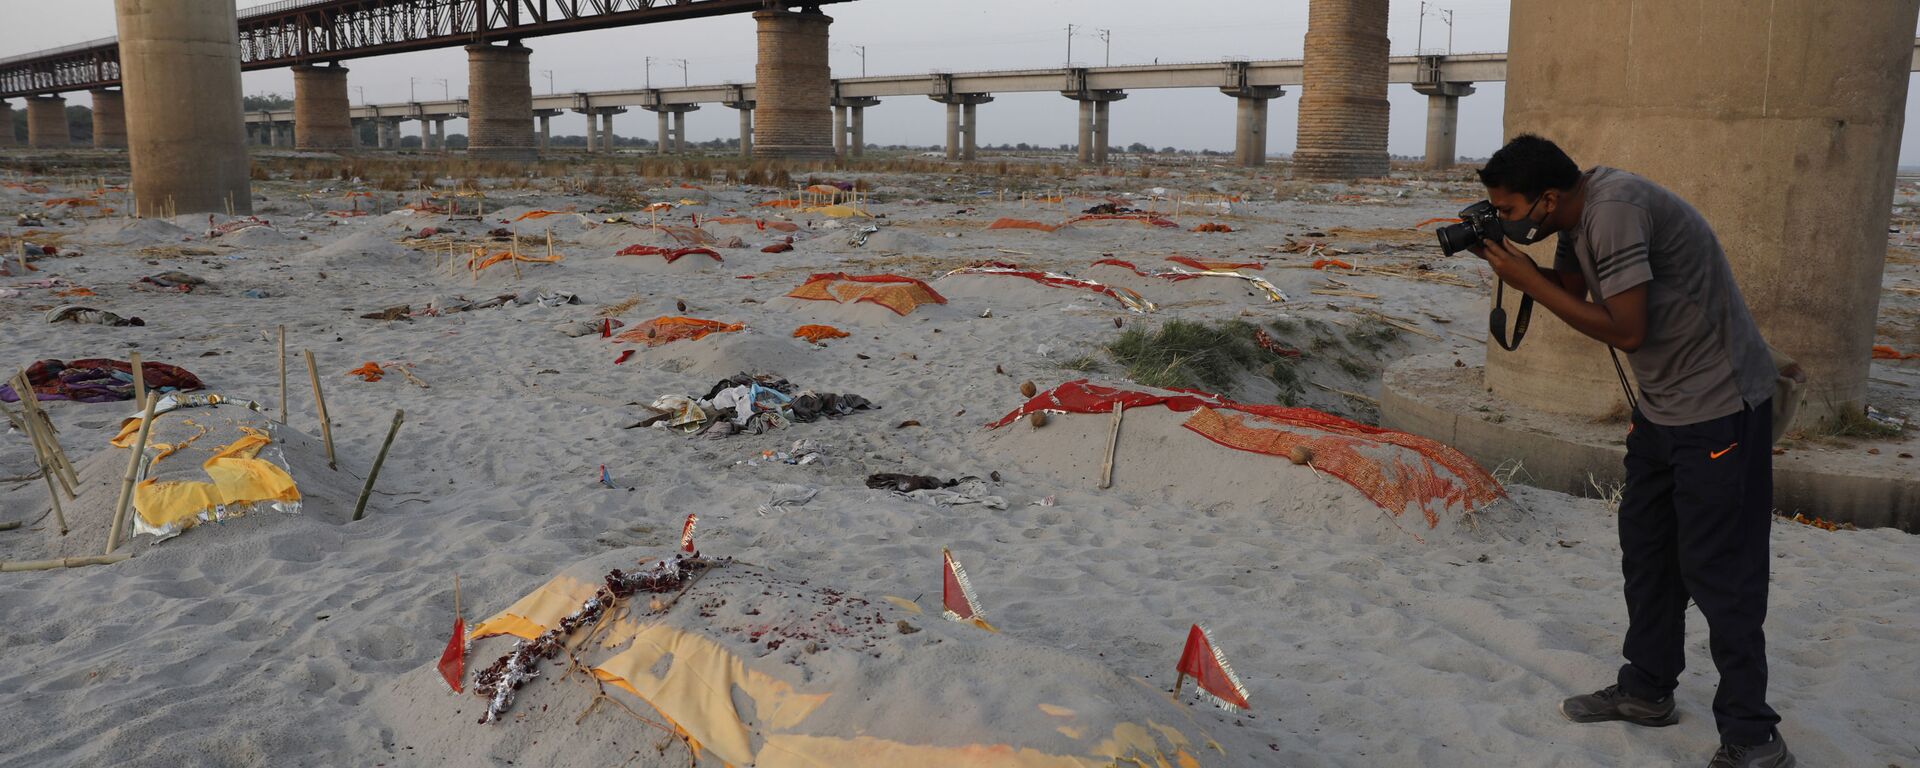 Bodies of suspected Covid-19 victims are seen in shallow graves buried in the sand near a cremation ground on the banks of Ganges River in Prayagraj, India, Saturday, May 15, 2021 - Sputnik International, 1920, 18.05.2021